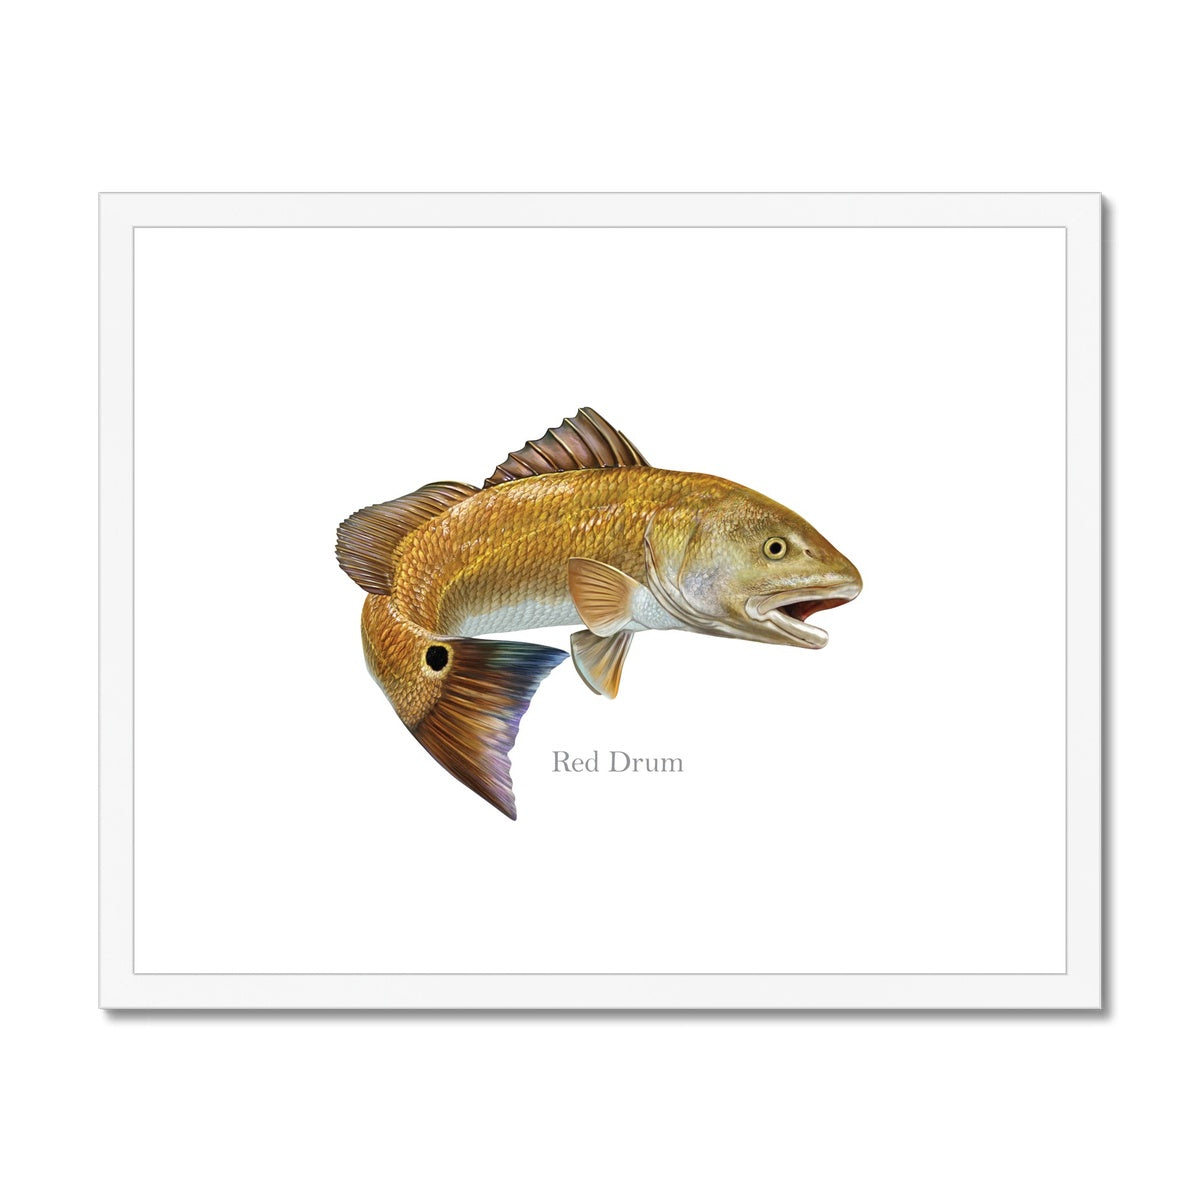 Red Drum - Framed & Mounted Print